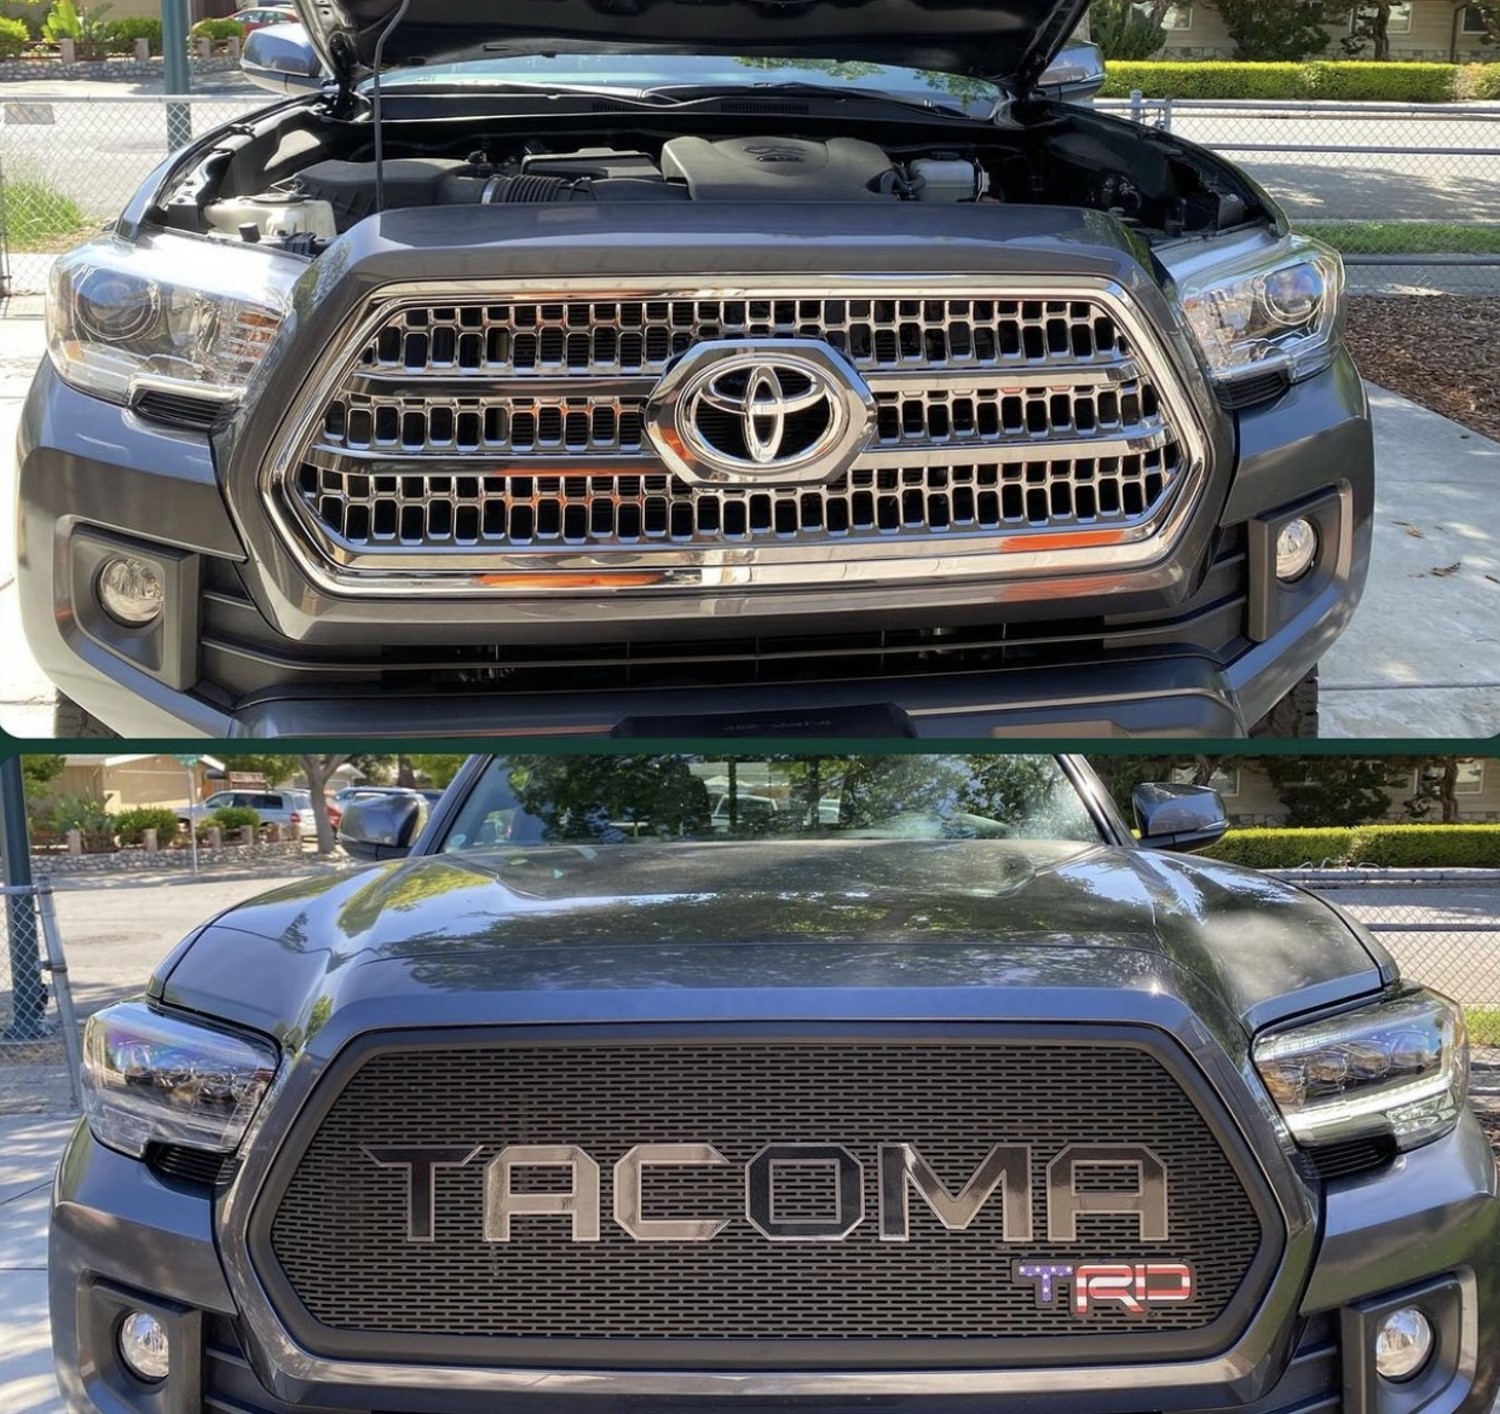 3rd Gen Tacoma Grille, Stunning Before & After Chrome Delete with Big Letters and USA Flag TRD